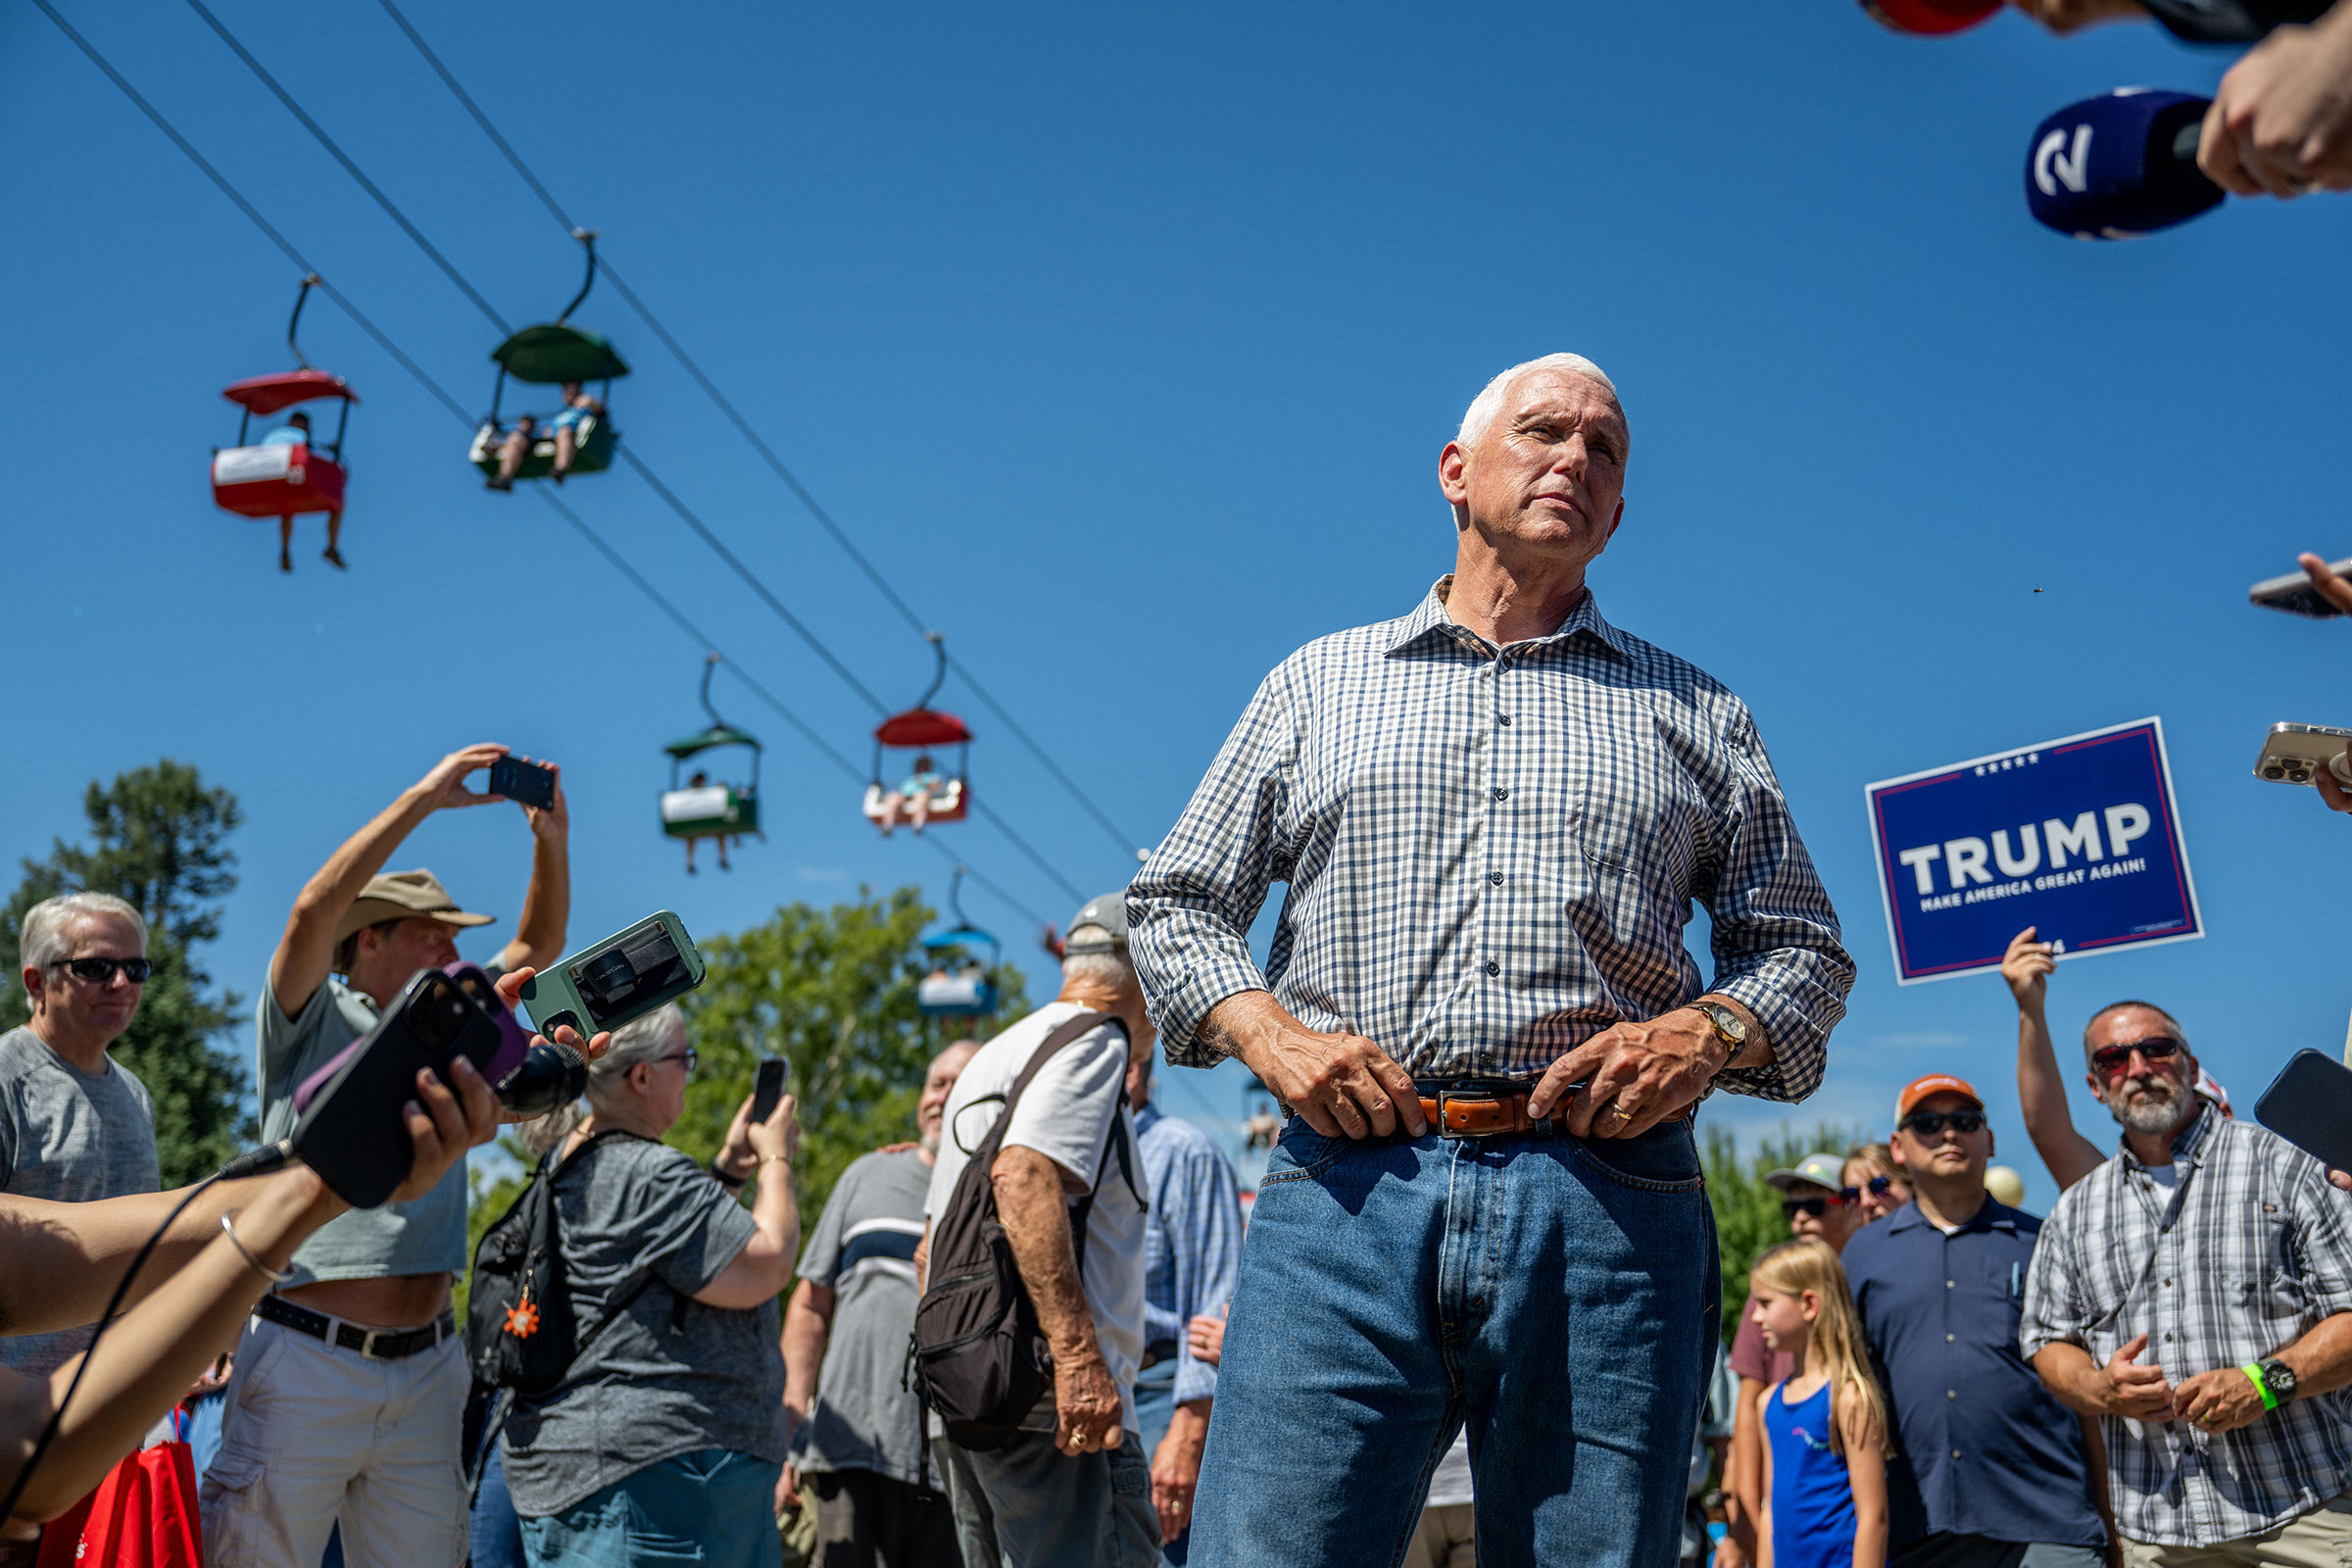 Mike Pence stands with his hands on his belt and looks off at reporters who are surrounding him at the Iowa State Fair